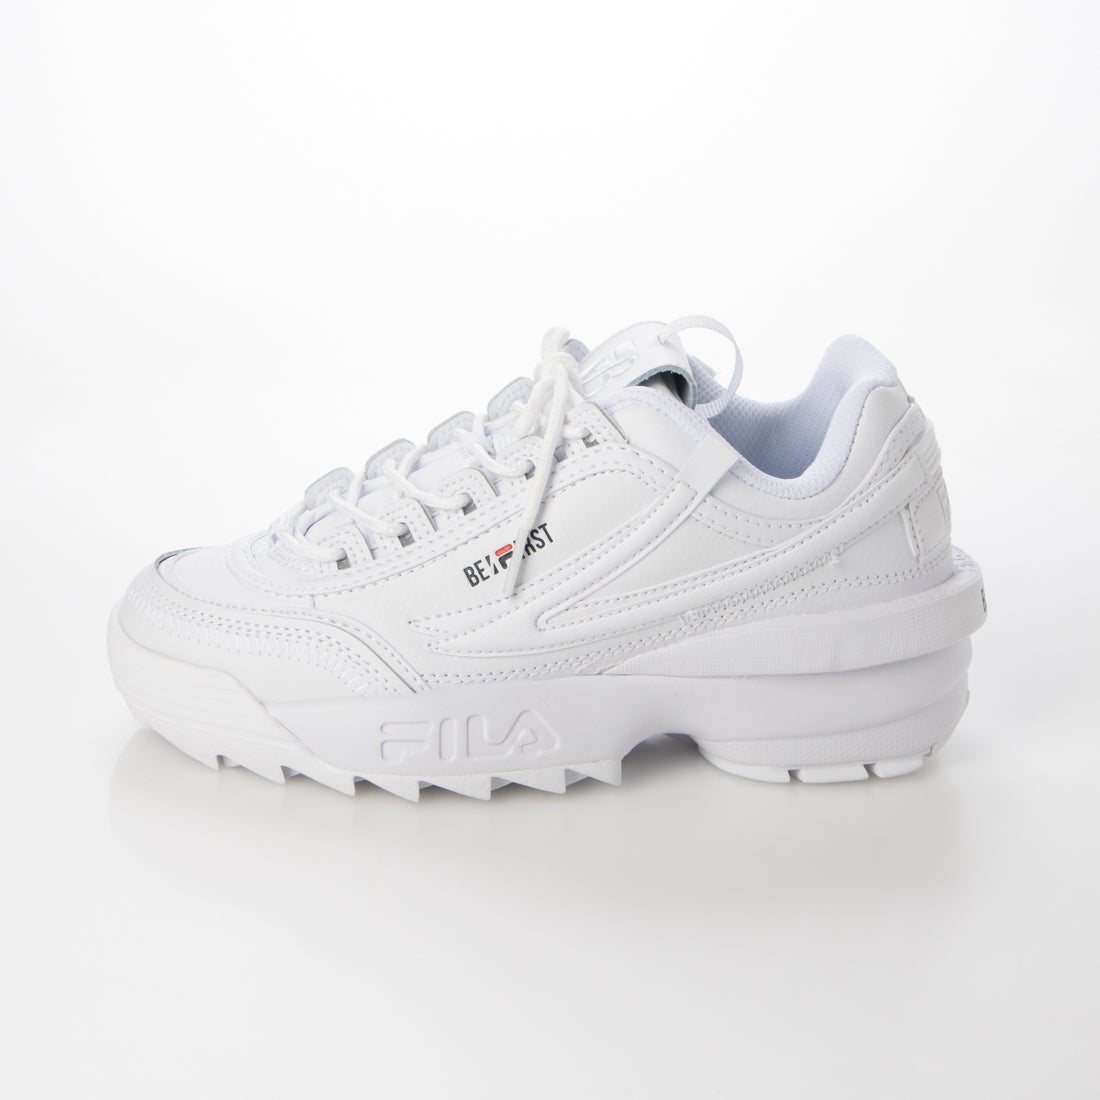 BE:FIRST コラボモデル】フィラ FILA Disruptor II EXP x BE:FIRST 